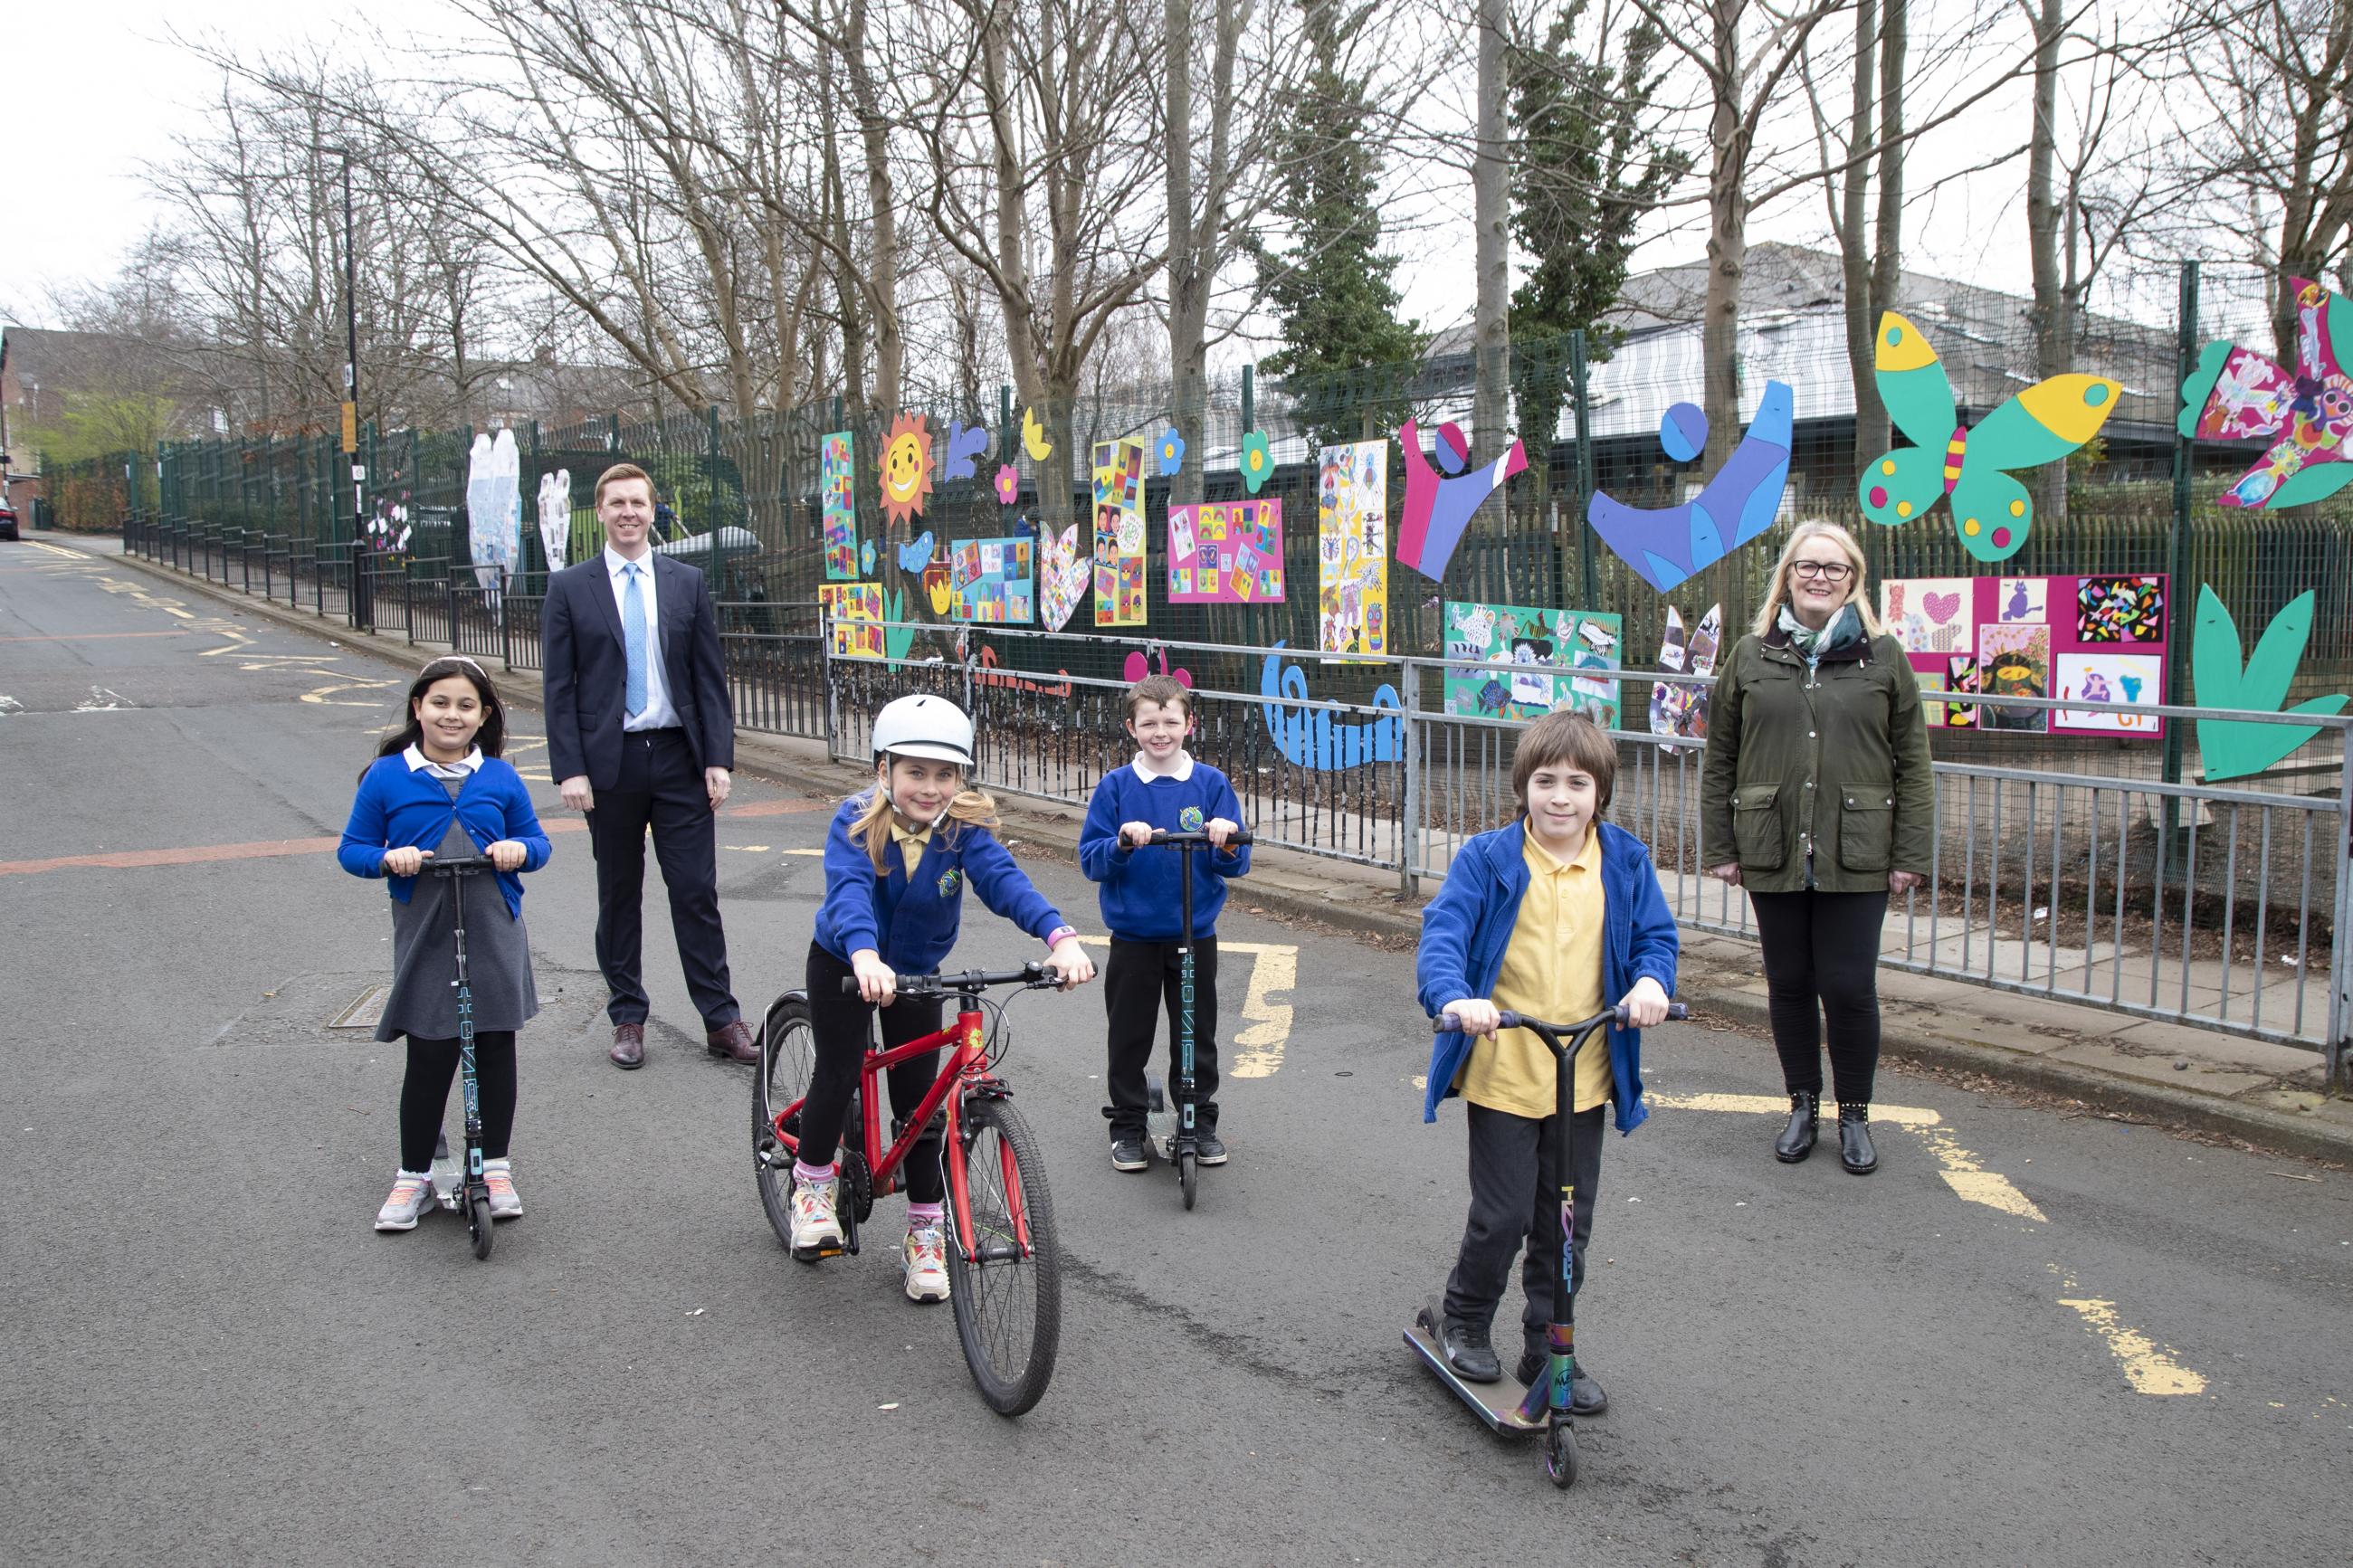 Image showing four primary school children in uniform, three on scooters, one on a bike, outside a school with two adults standing alongside.